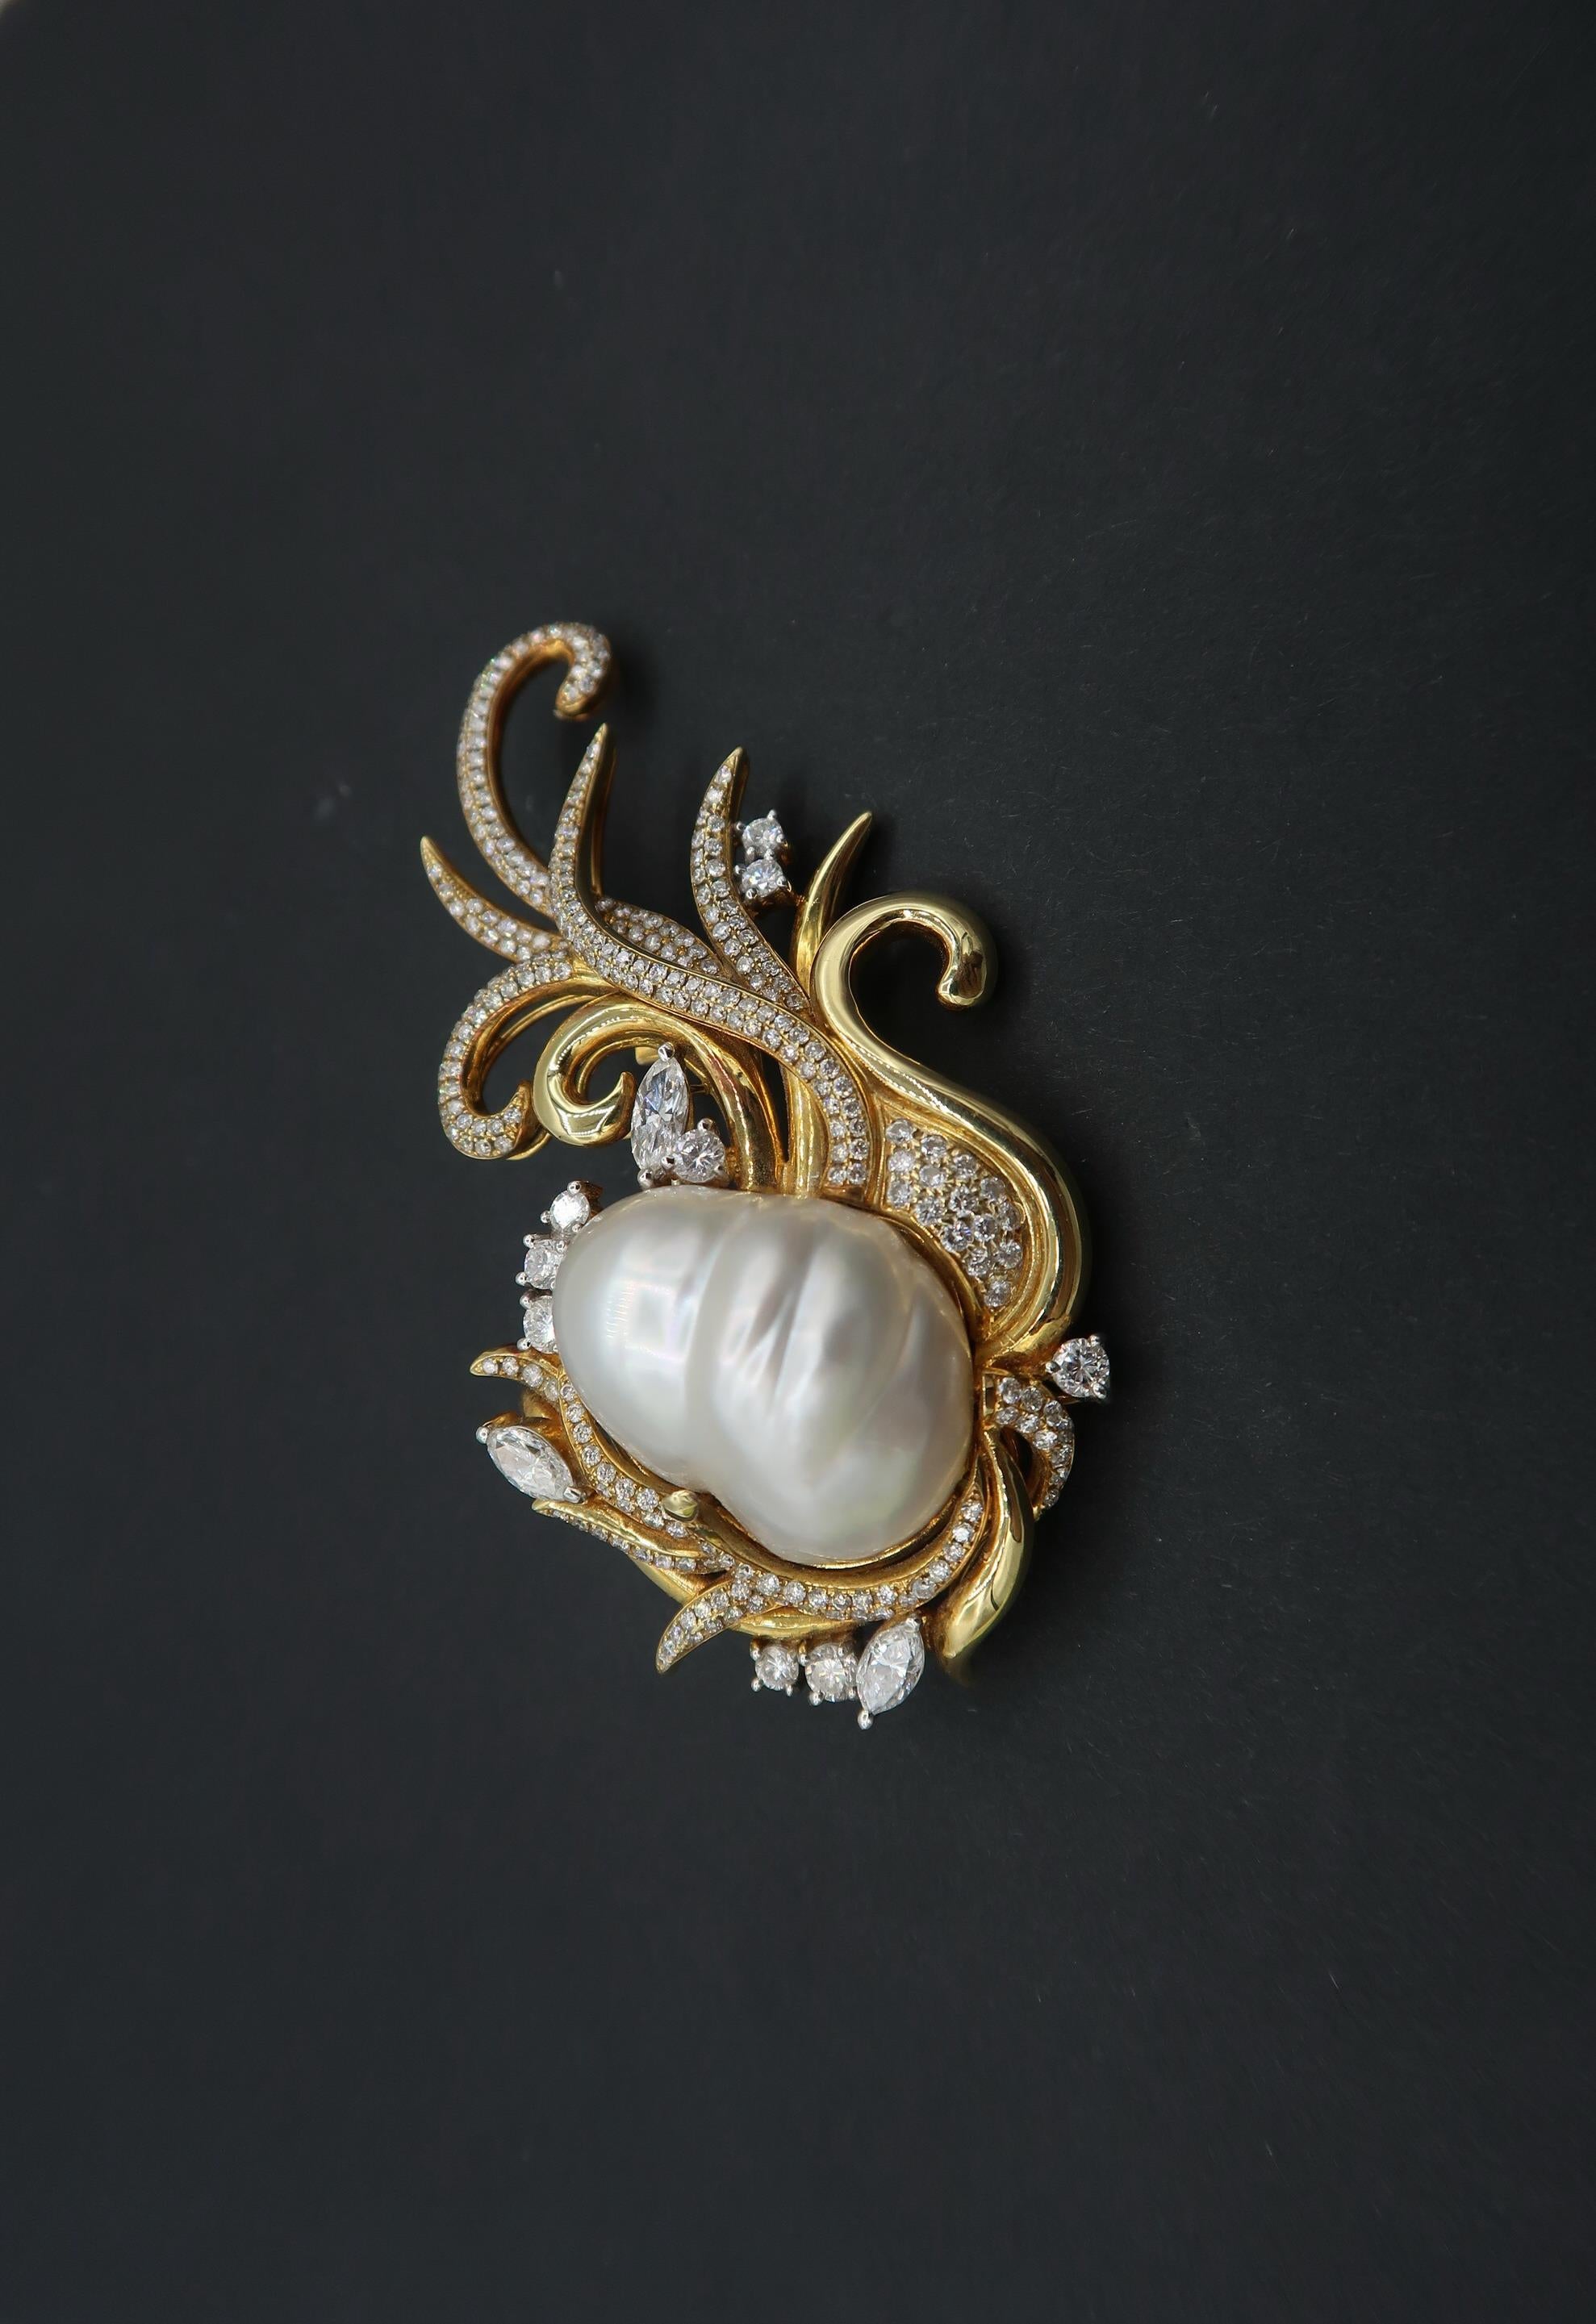 Important 25.12mm White South Sea Pearl Diamond Brooch in 18K Yellow Gold Setting

Height : approx. 7.3cms.
Width : approx. 4cms.

Diamond : 3.41cts
Pearl : White South Sea Pearl approx. 25.12mm * 20.05mm
Gold : 18K Yellow Gold 35.332g.